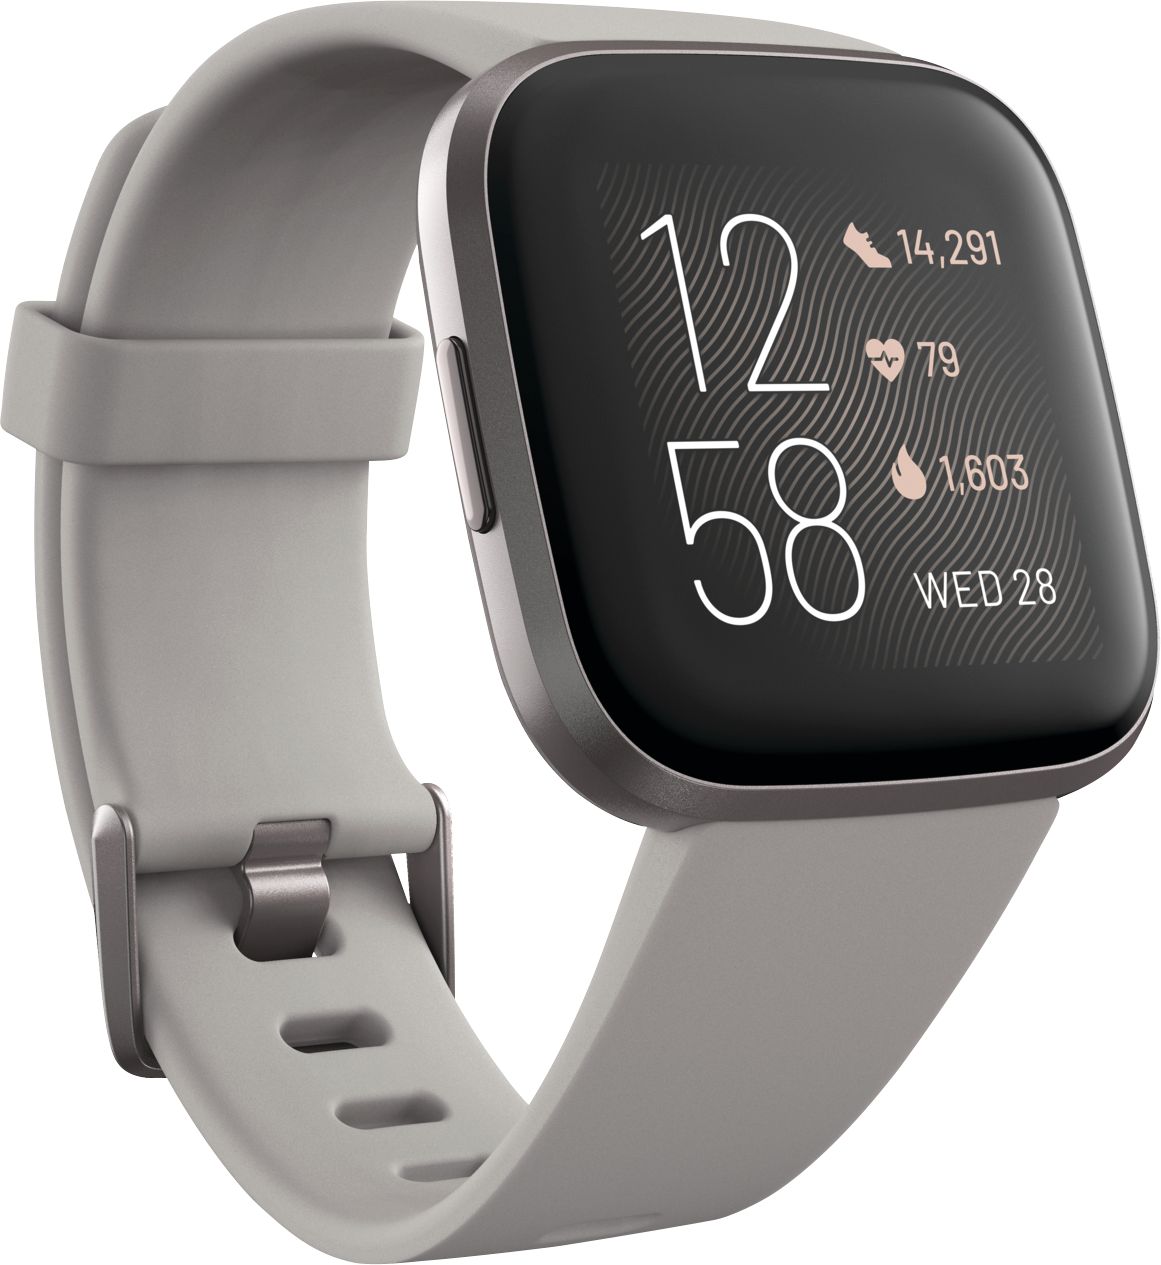 Angle View: Apple Watch SE 1st Generation (GPS) 40mm Aluminum Case with Sport Band - Space Gray